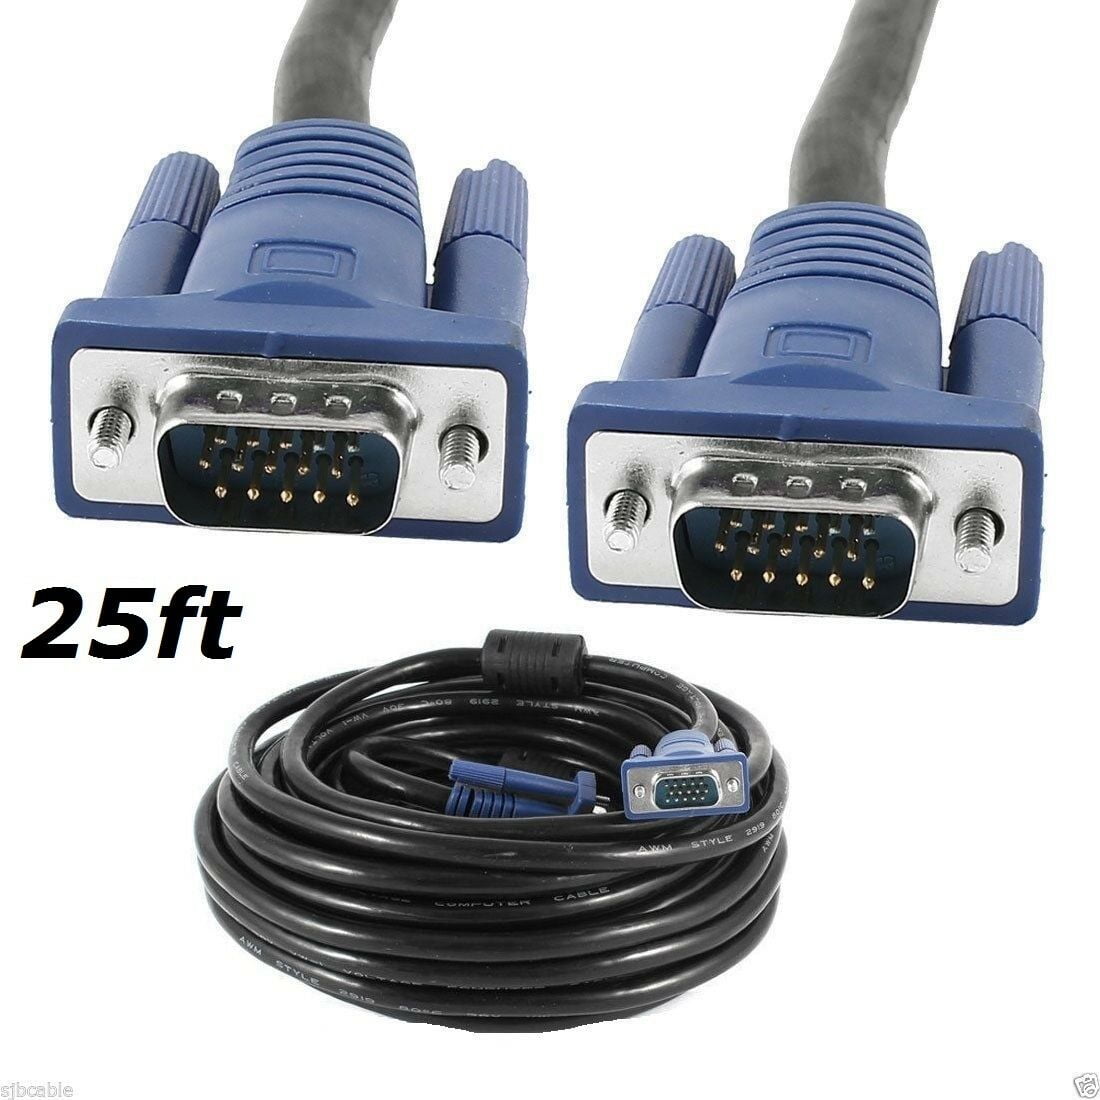 BLUE 15 Pin SVGA VGA Male to MALE M-M PC Monitor TV Cable Support Full HD 1080p 